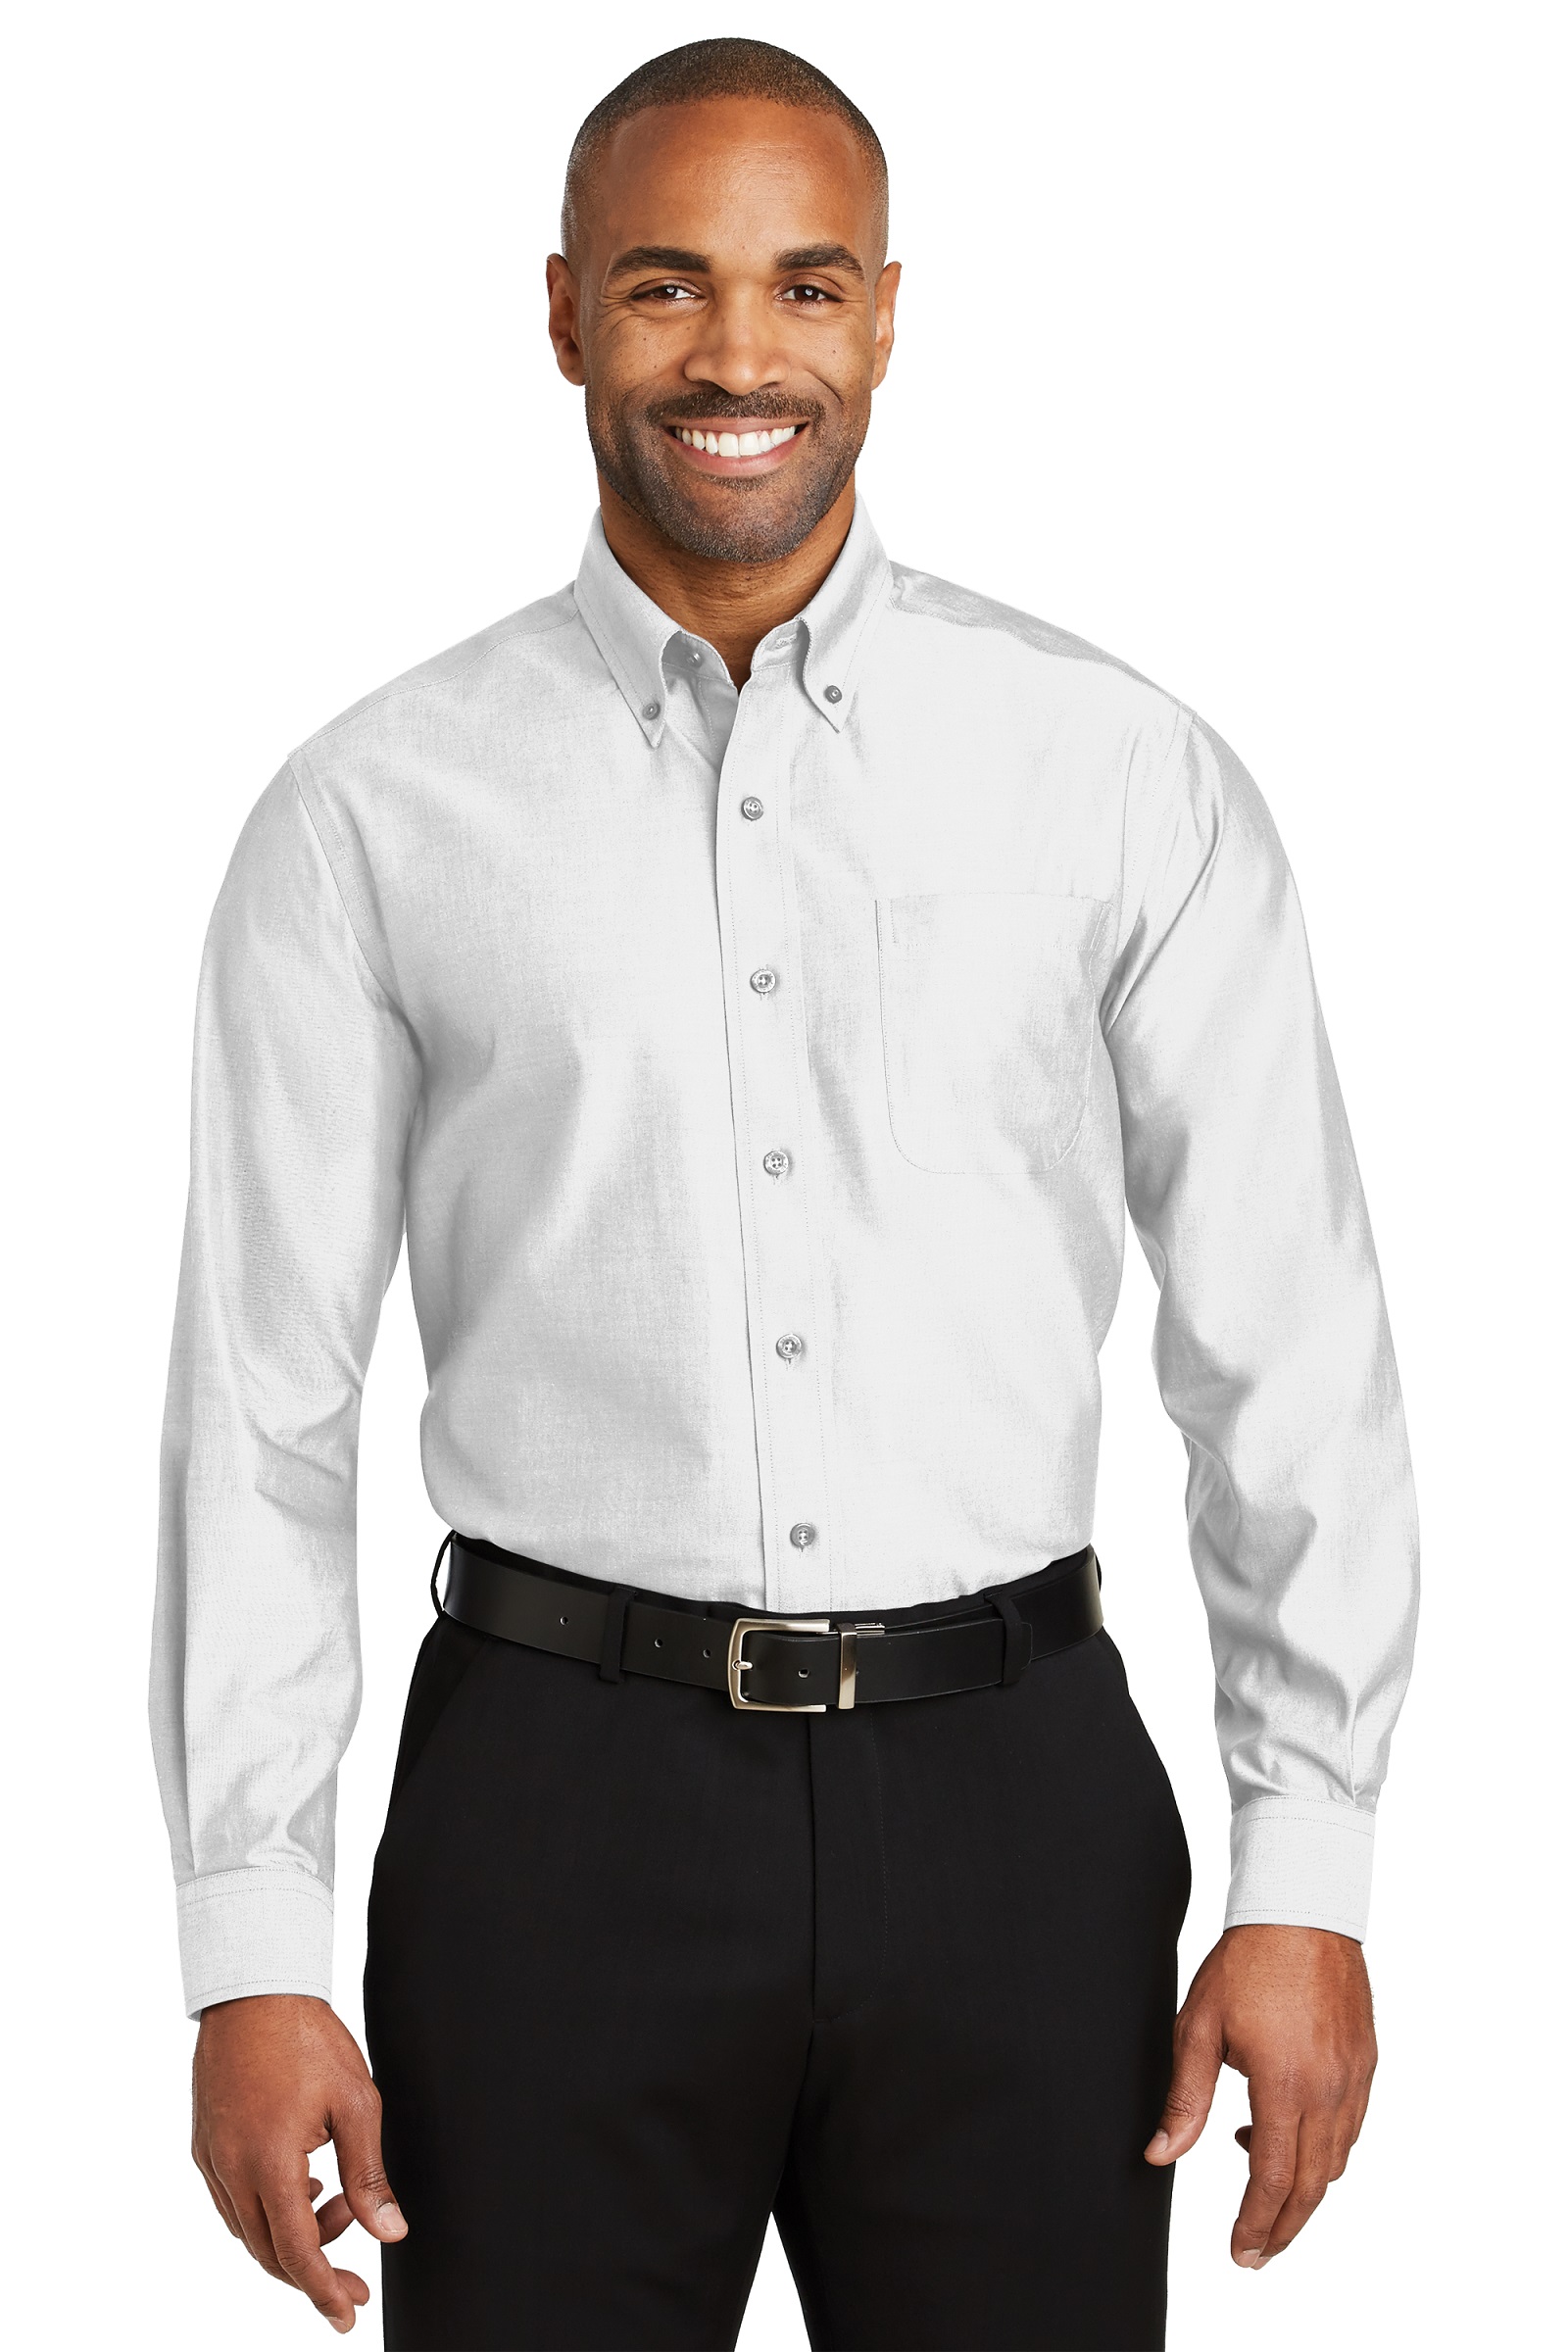 Red House Embroidered Men's Non-Iron Pinpoint Oxford Shirt